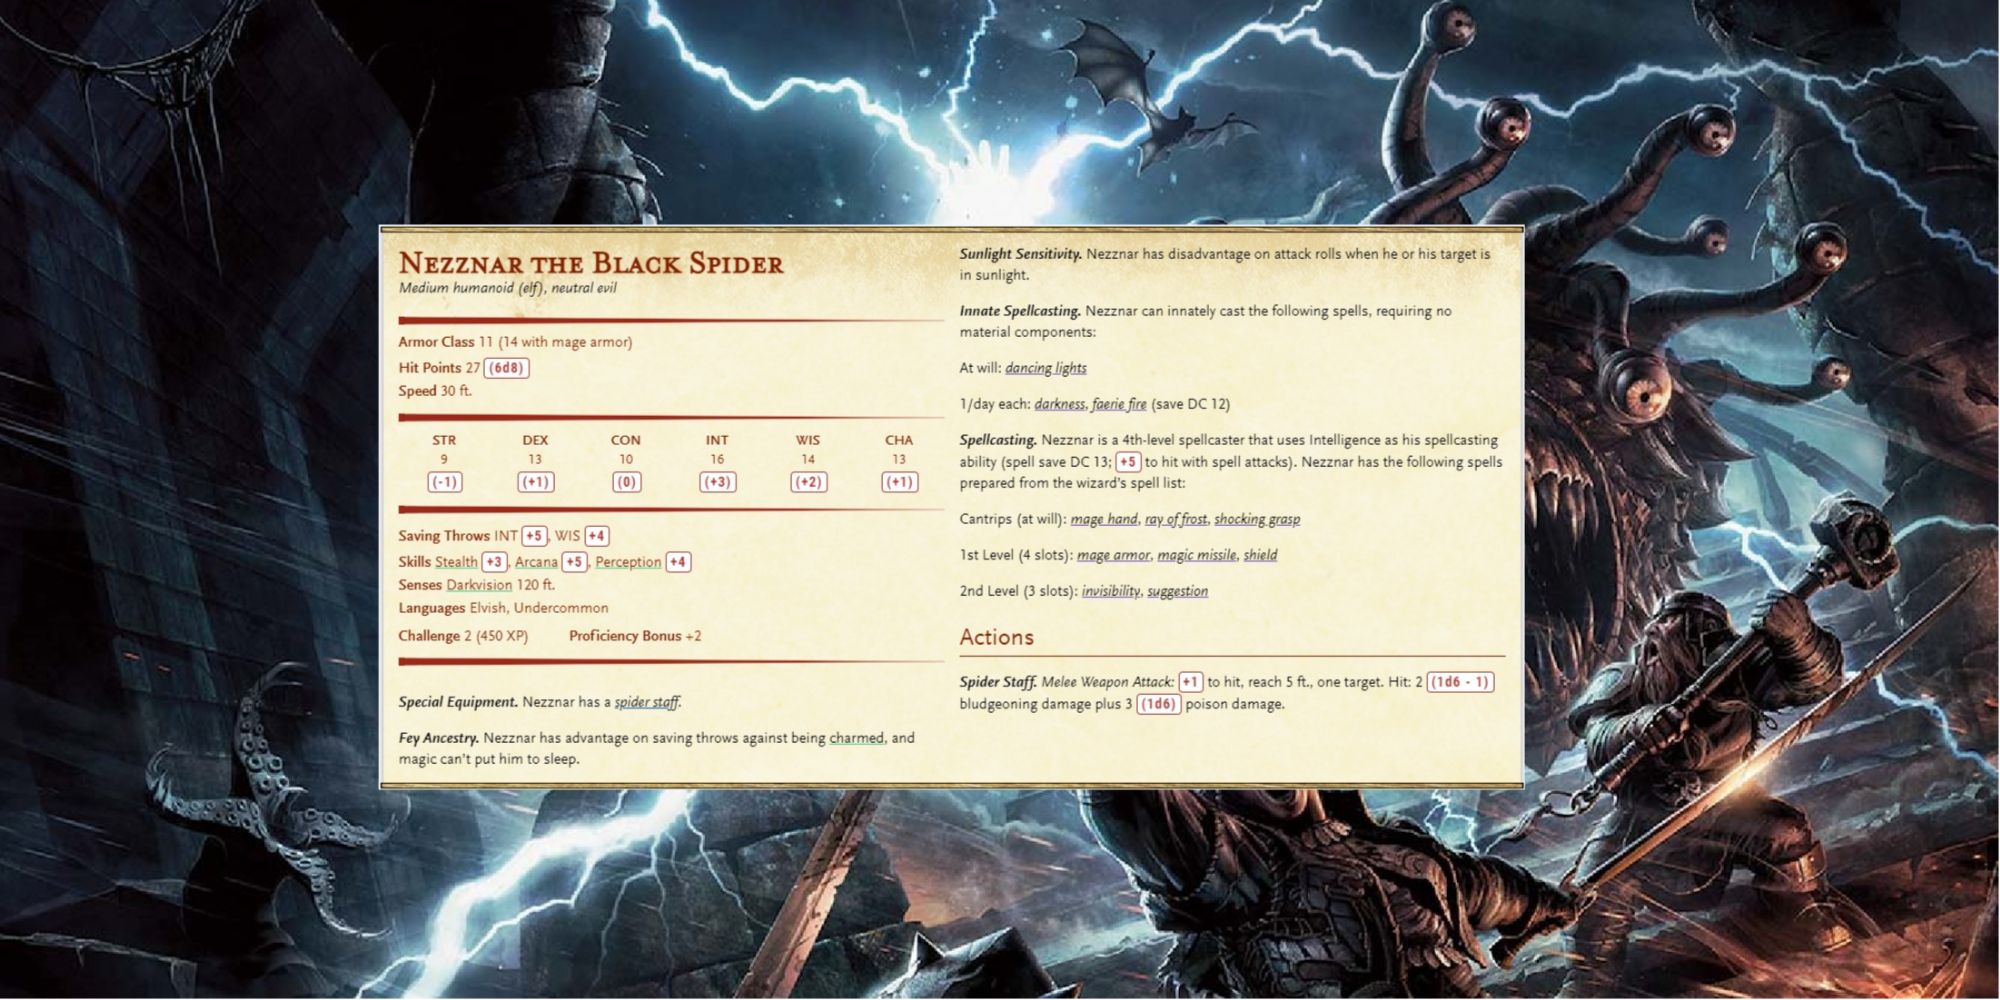 Dungeons And Dragons Nezznar The Black Spider Stats